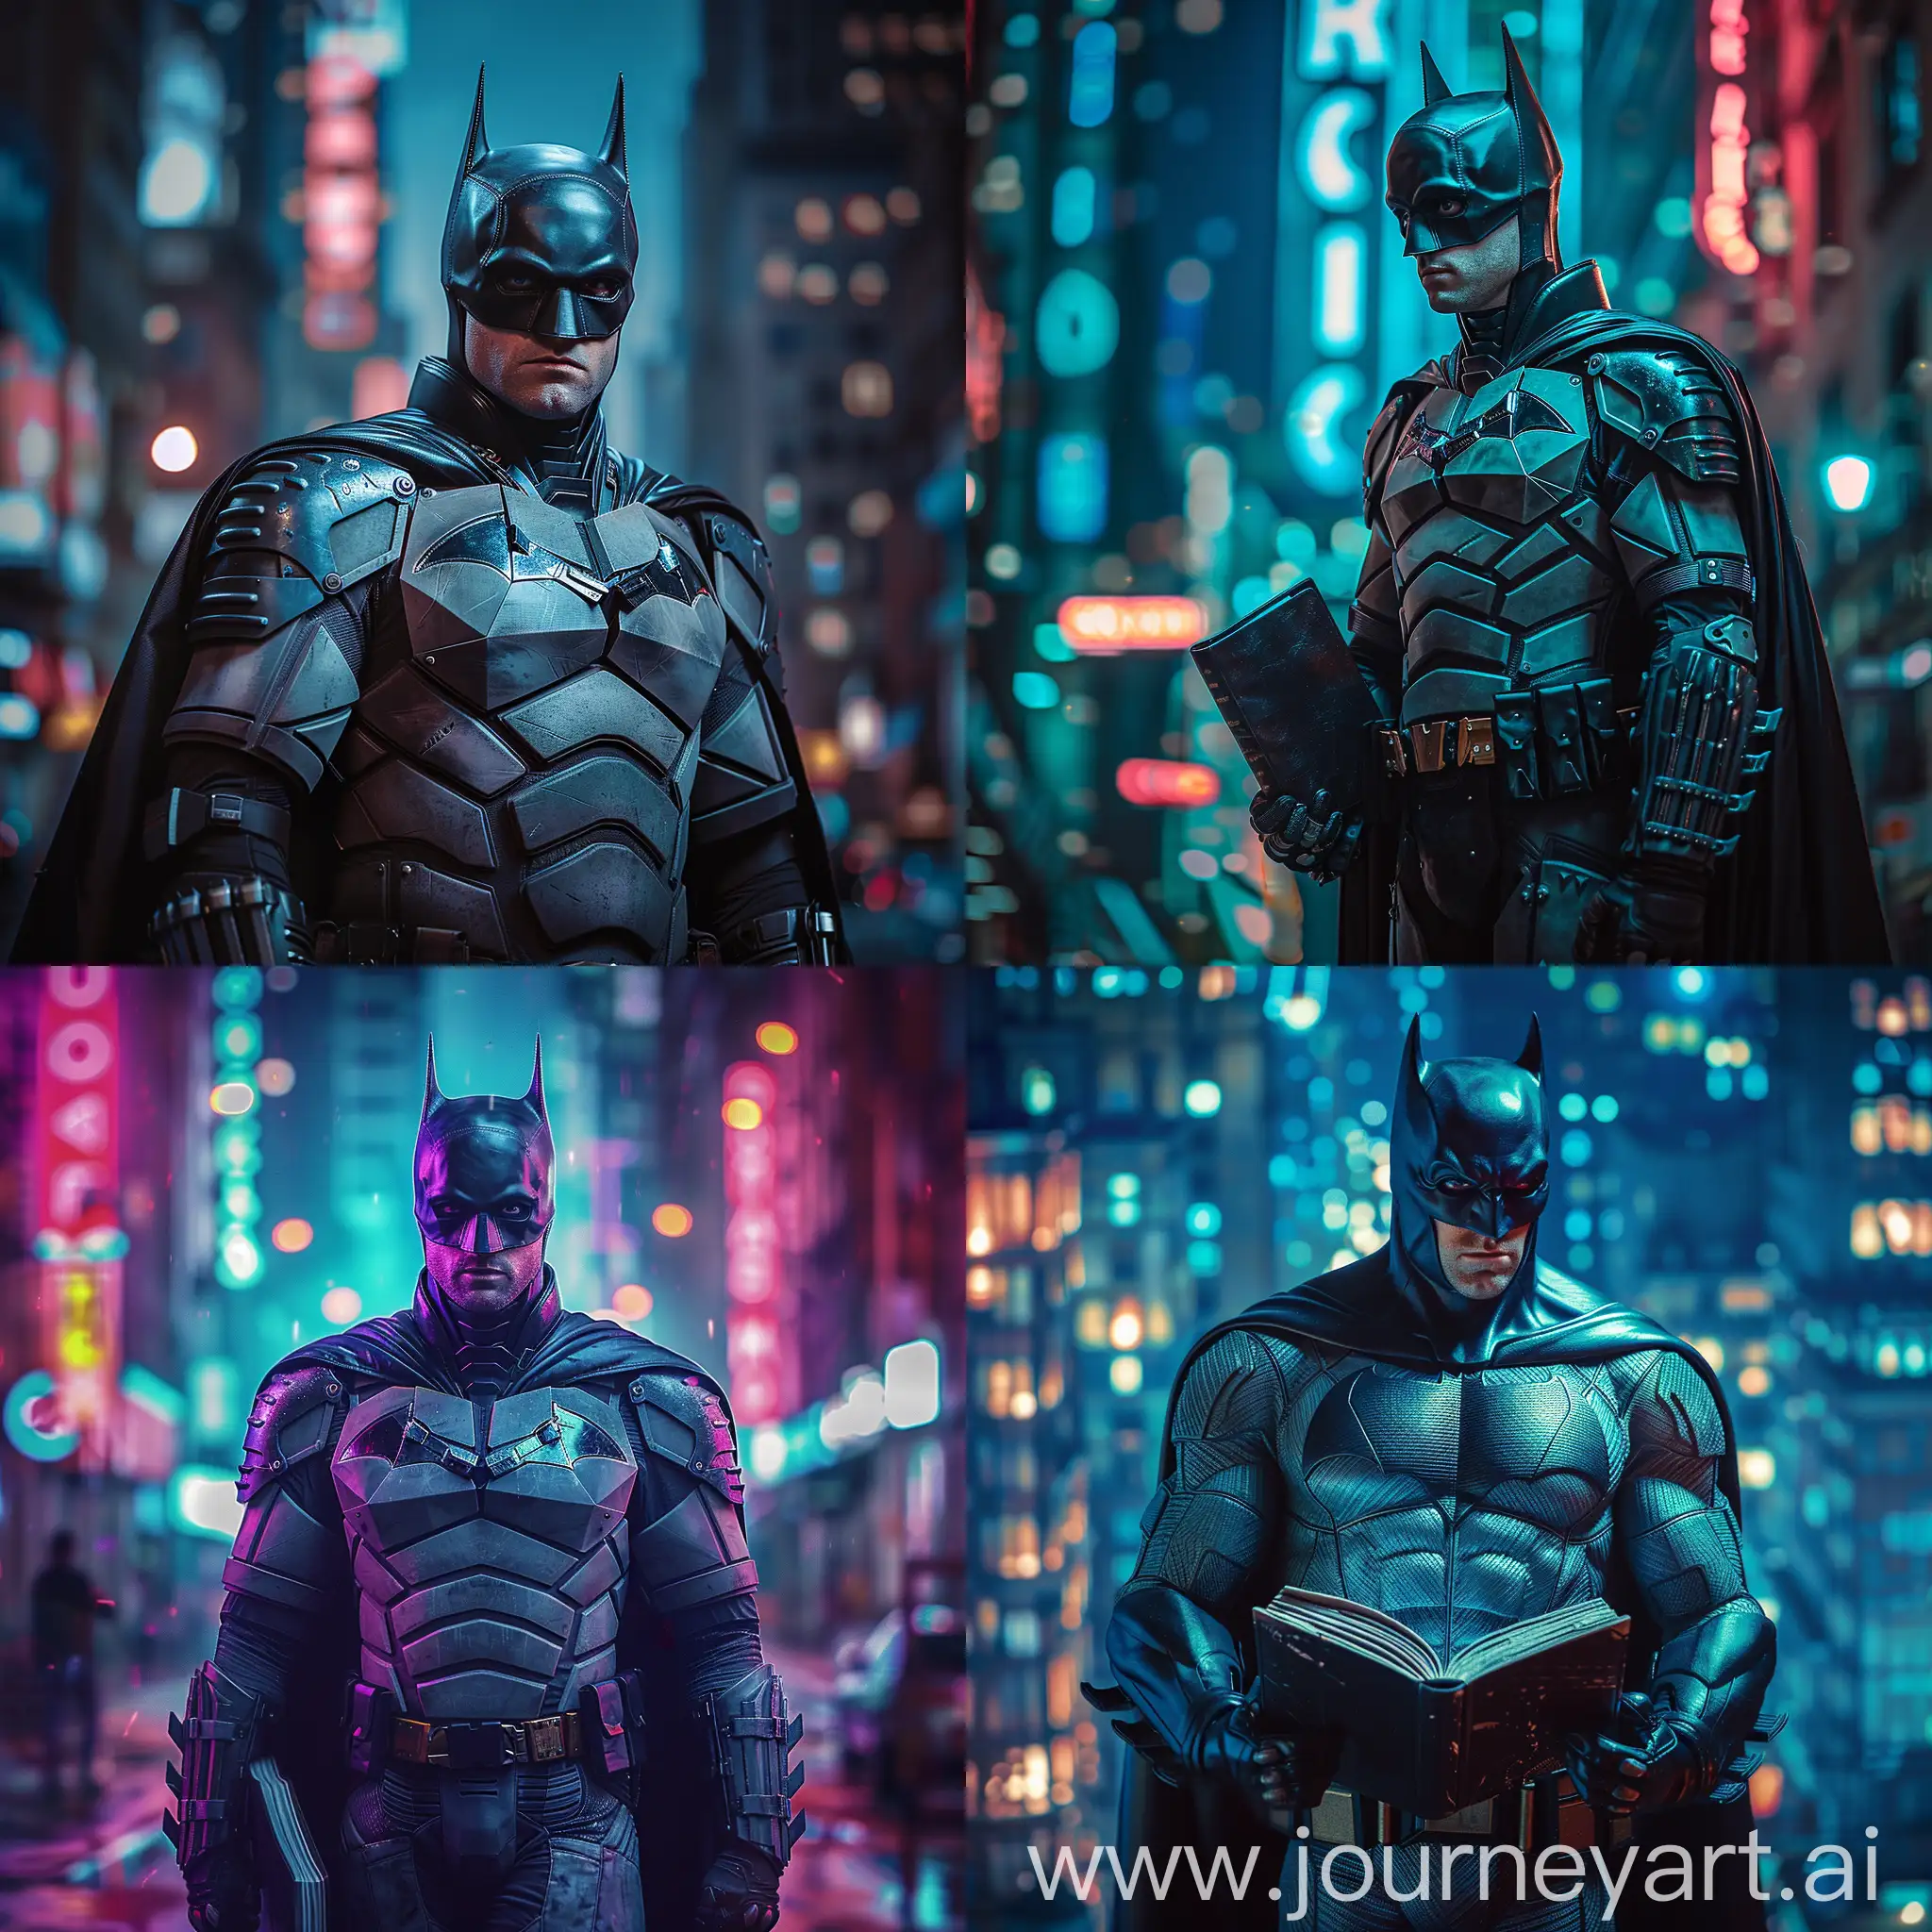 captivating cinematic portrait of unmasked Batman featuring the iconic superhero without his mask. Imagine Batman standing against the backdrop of a cityscape at night, with a subtle lens flare highlighting his determined expression. To add a unique twist, dress Batman in his signature costume but have him wear a stylish high-school backpack, symbolizing his intelligence and dedication to learning. In his gloved hand, have Batman hold an open book, a metaphor for his commitment to justice and continual growth. Enhance the overall atmosphere with vibrant neon lights strategically placed throughout the scene, casting an enchanting glow and accentuating Batman's presence as a nocturnal vigilante